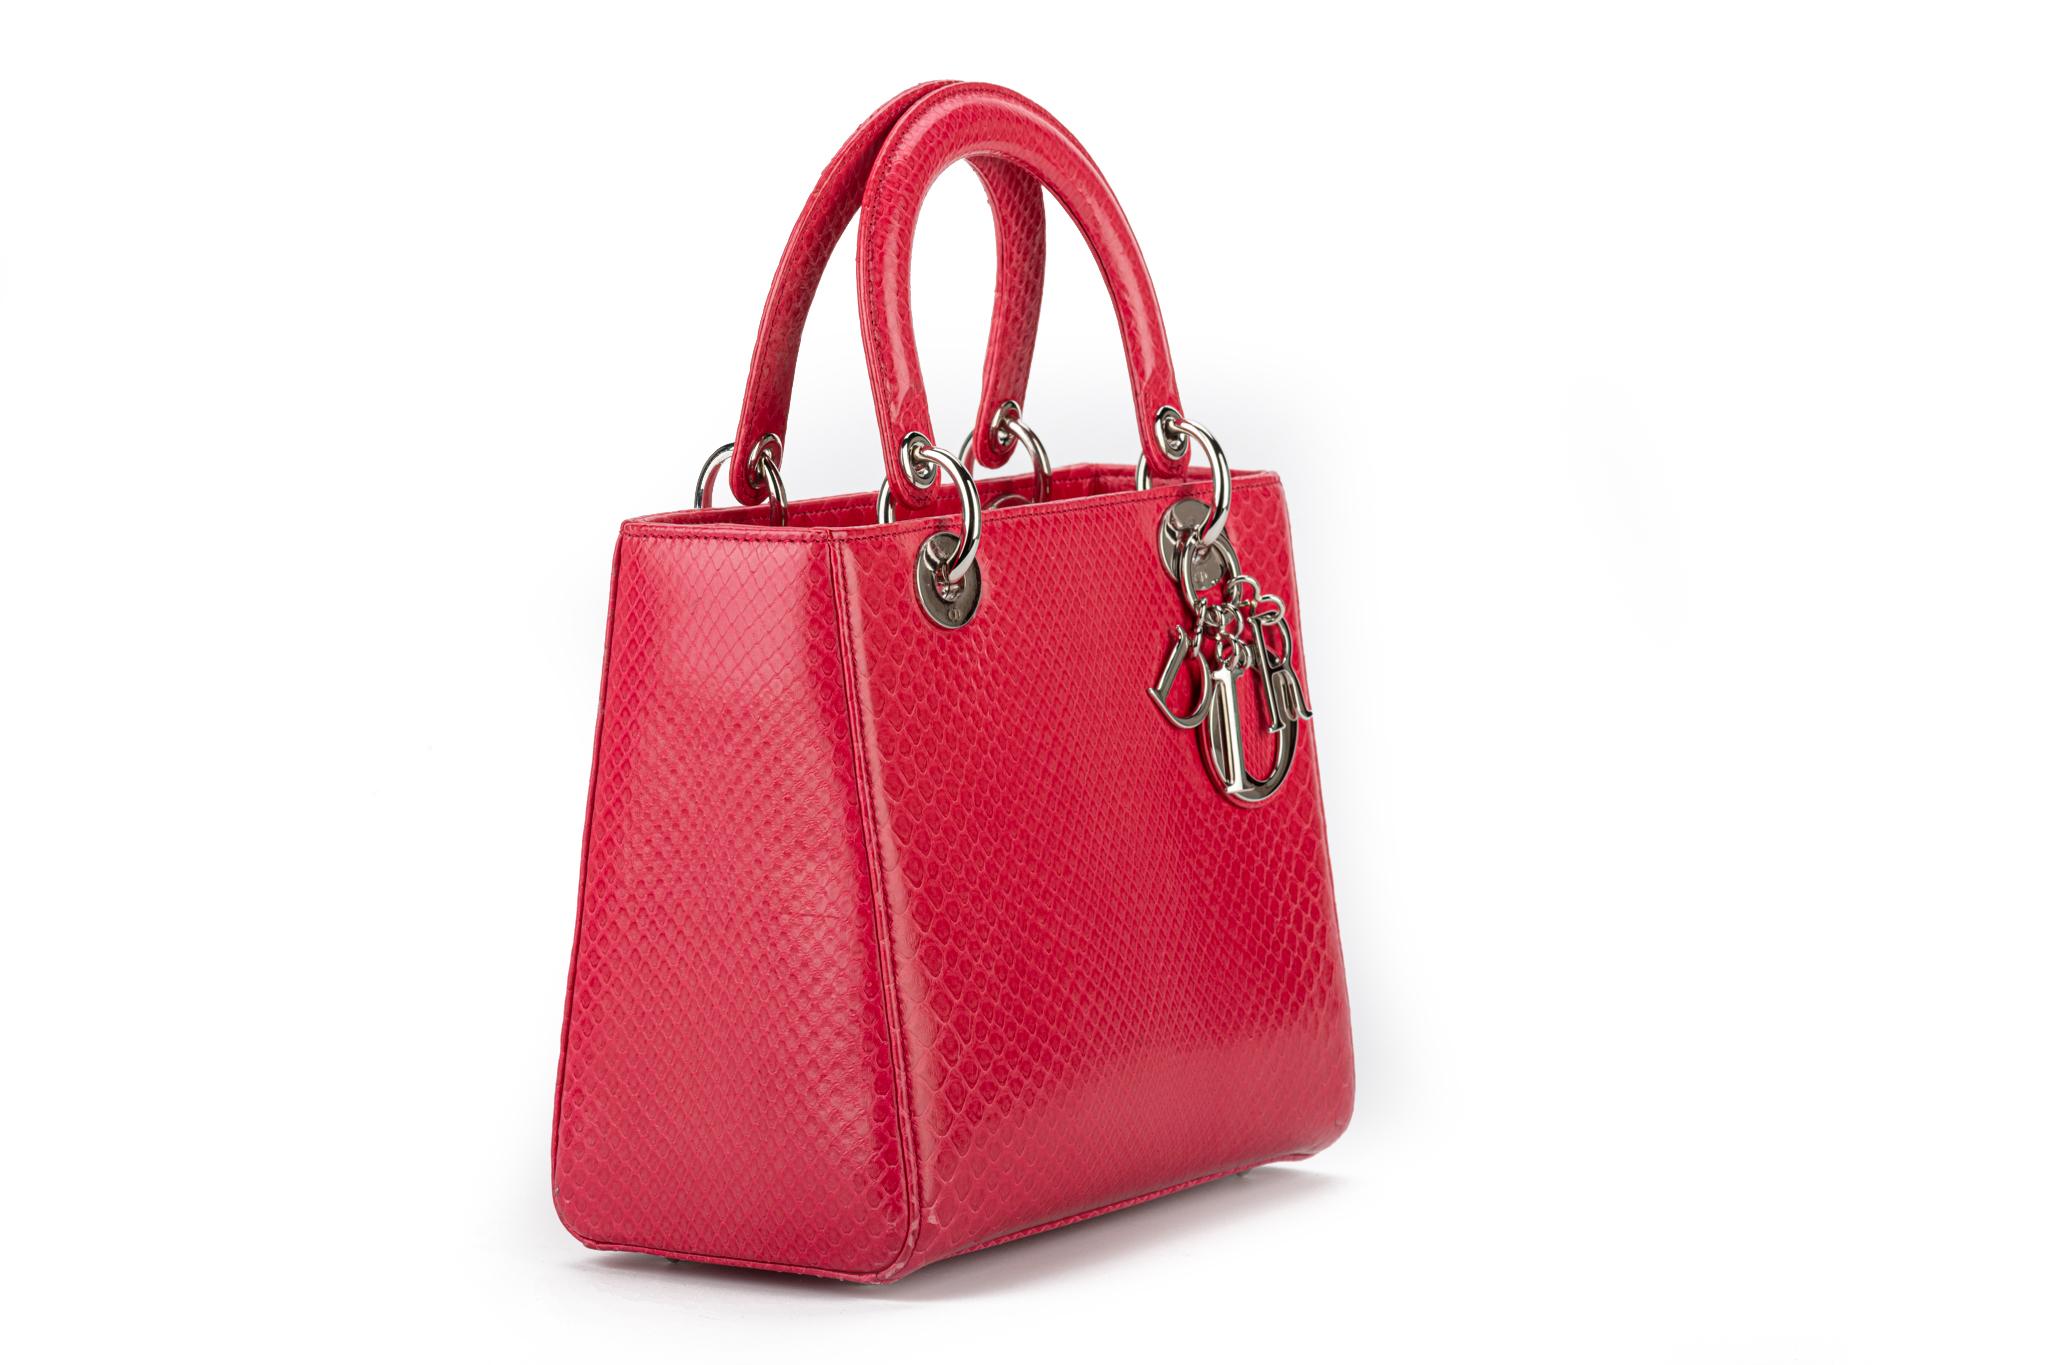  Lady Dior Large Red Python Bag In Excellent Condition For Sale In West Hollywood, CA